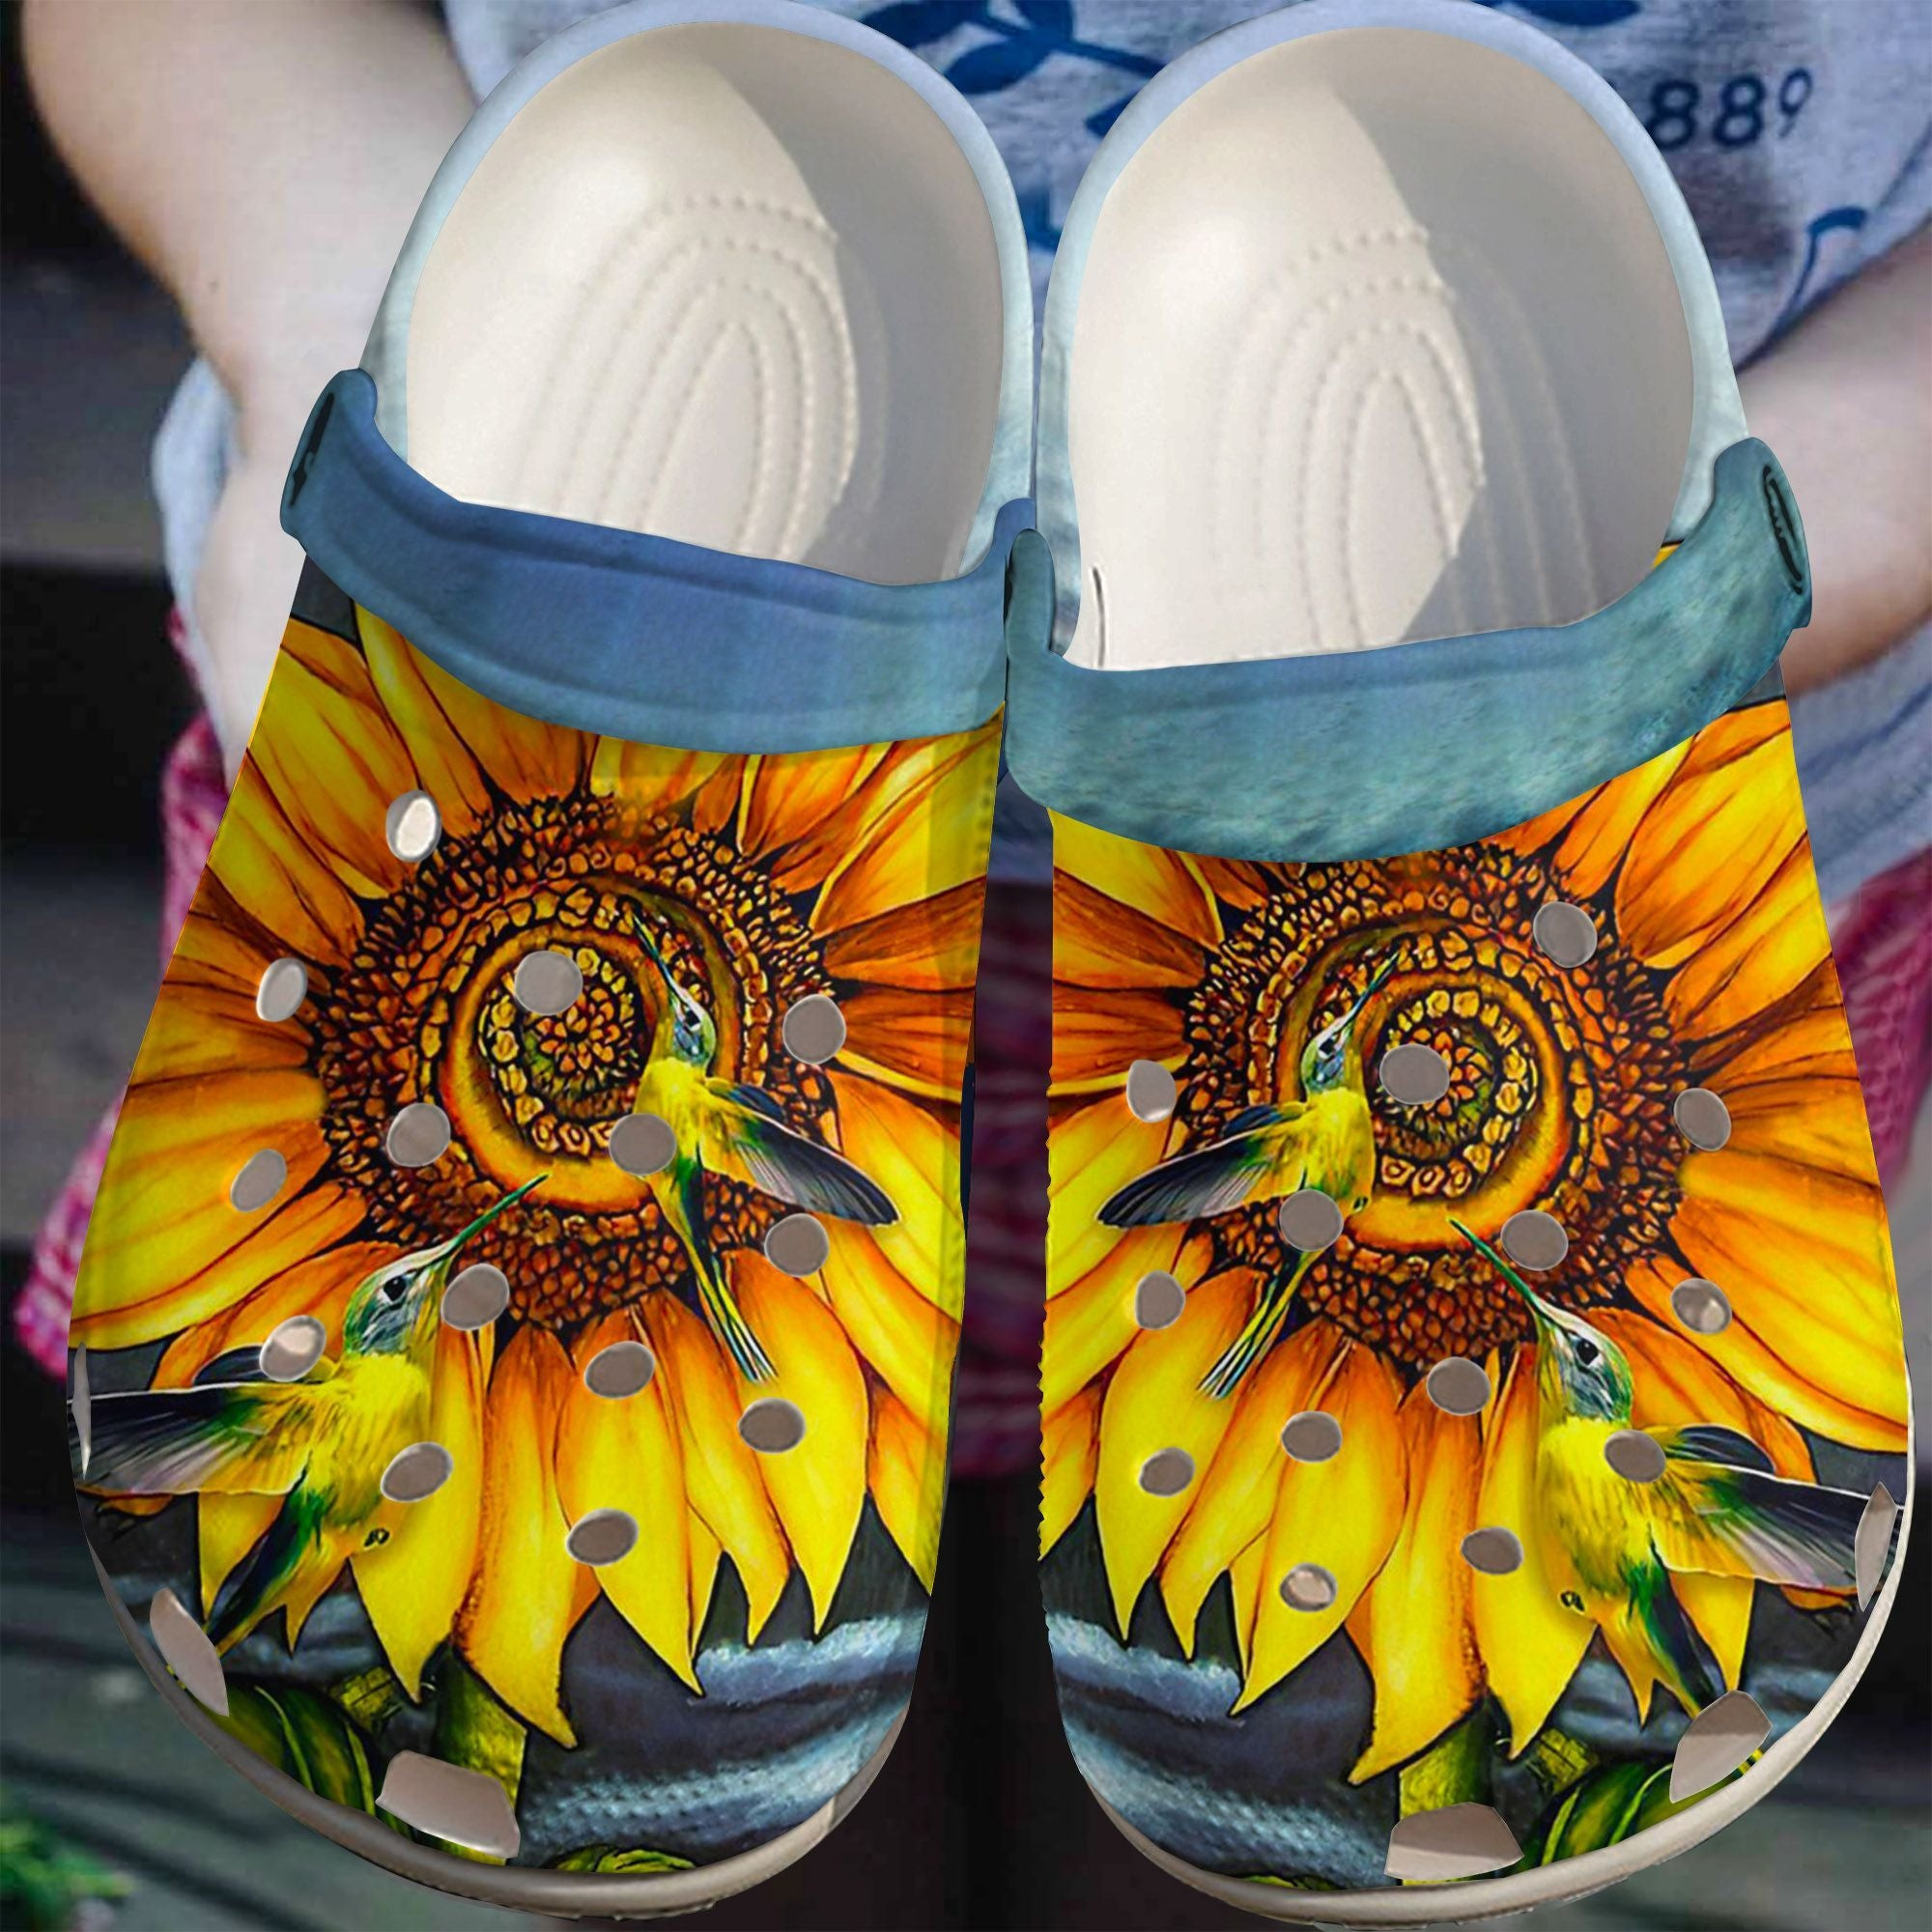 Humming Bird Sunflower Custom Crocs Clog Shoes - To The Sun Outdoor Crocs Clog Shoes Birthday Gift For Daughter Wife